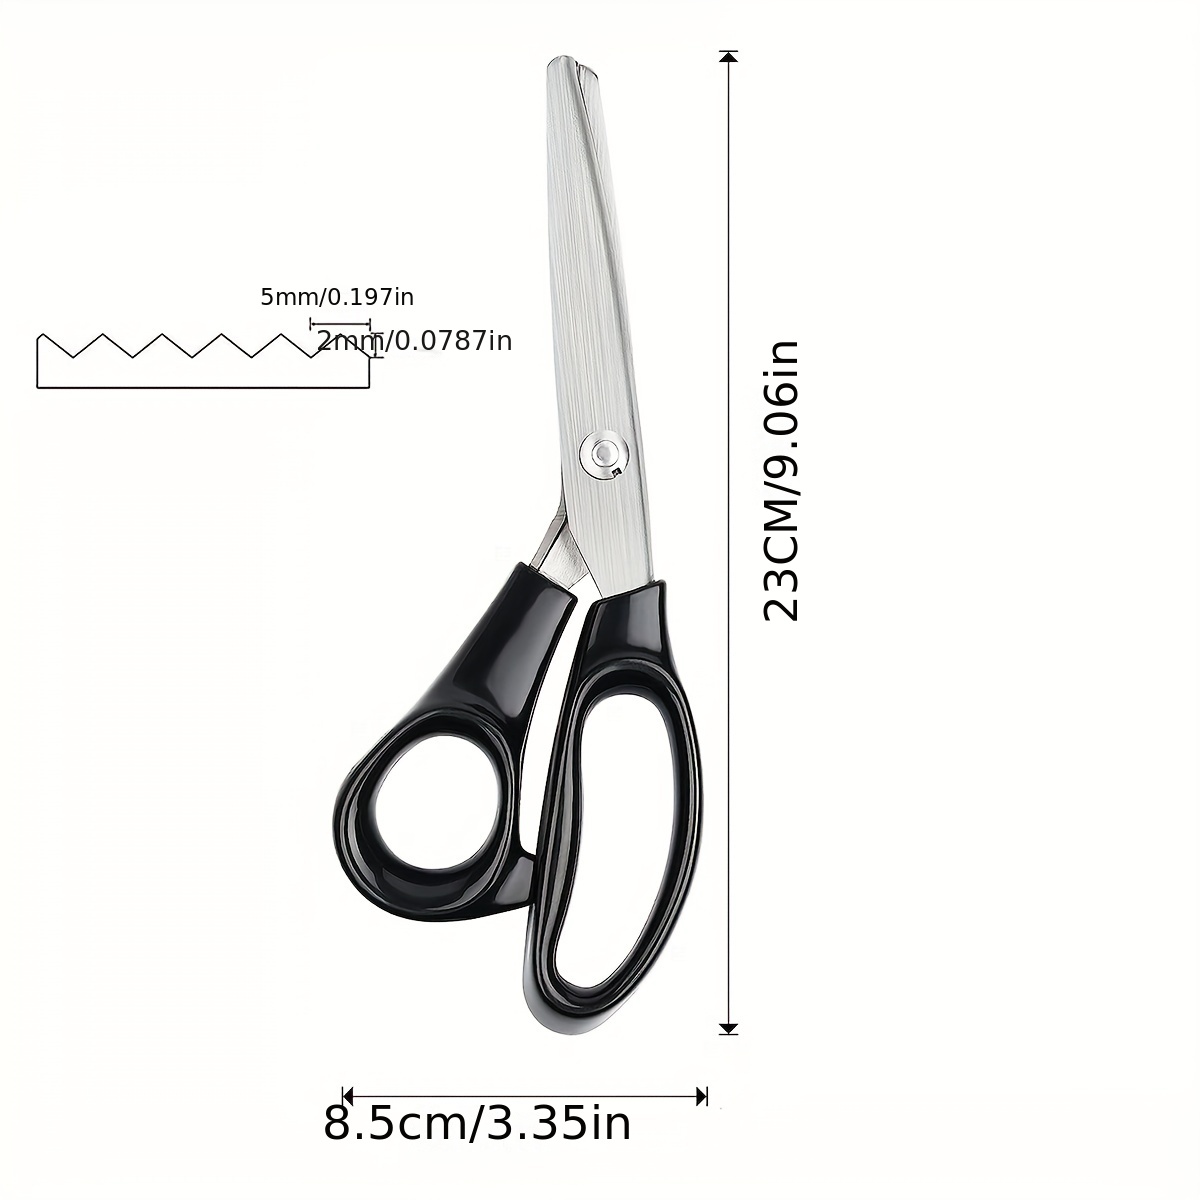 Pinking Shears for Fabric Cutting - Stainless Steel Fabric Scissors for  Cutting Clothes, Zig Zag Scissors Decorative Edge, Professional Craft  Scissors